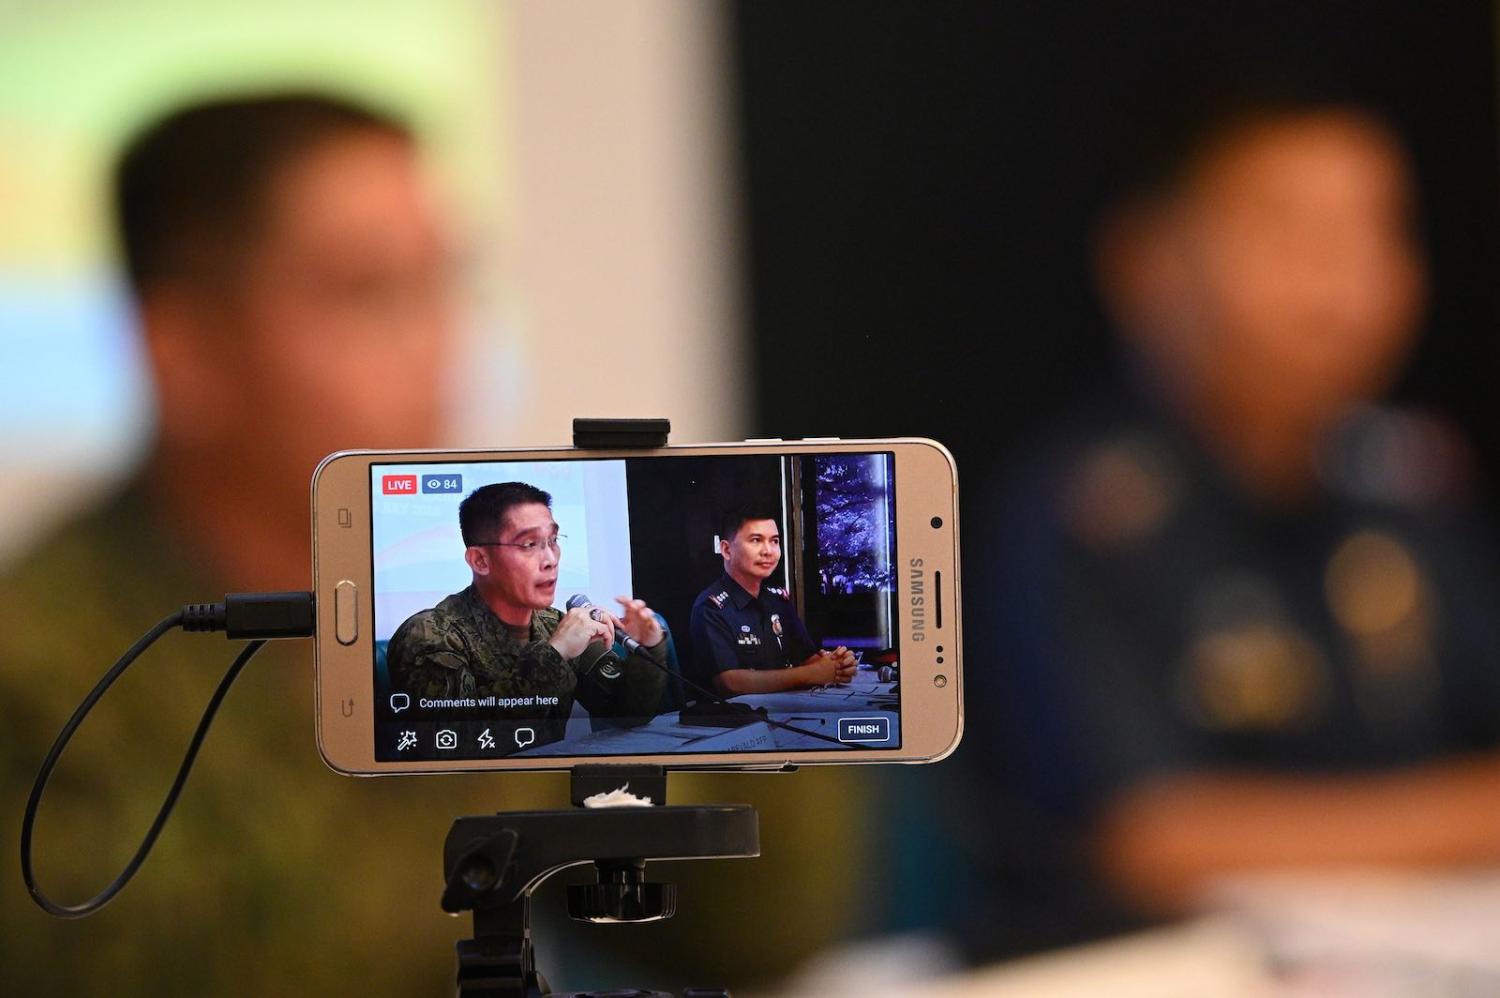 Philippine security personnel brief the media on investigations following a June bombing (Photo: Ted Aljibe via Getty)